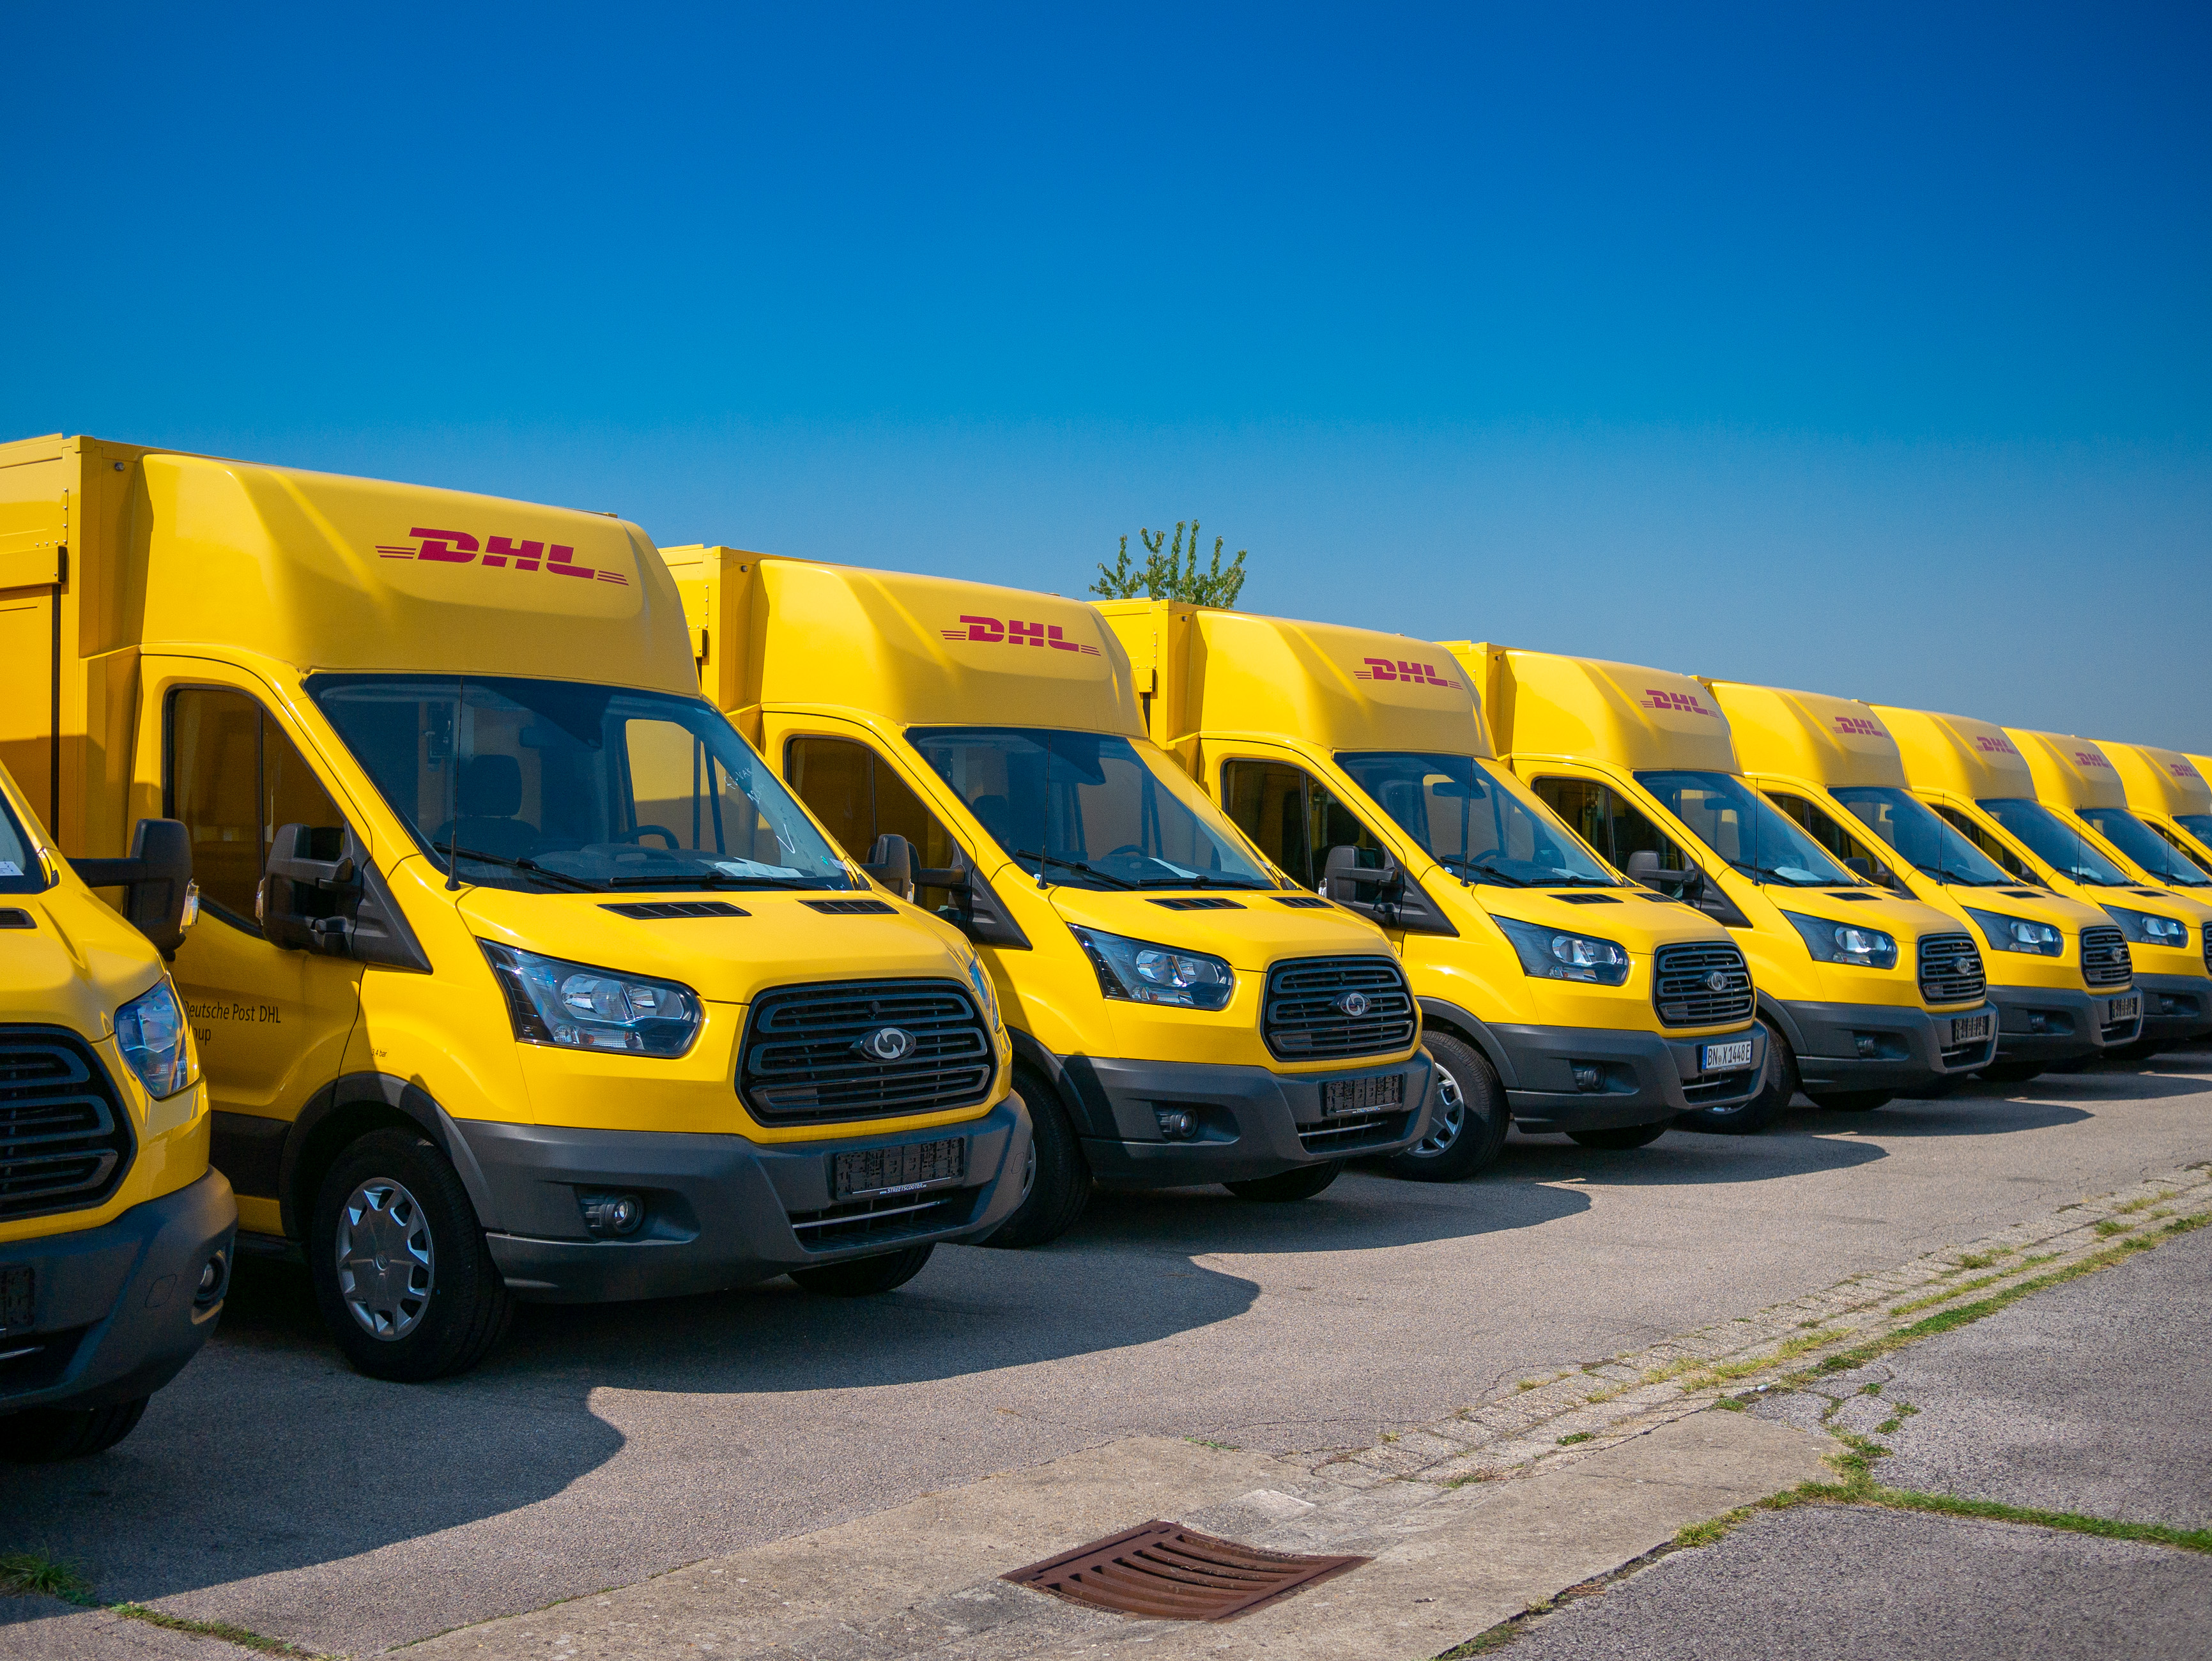 DHL Streetscooter Auto Wagen